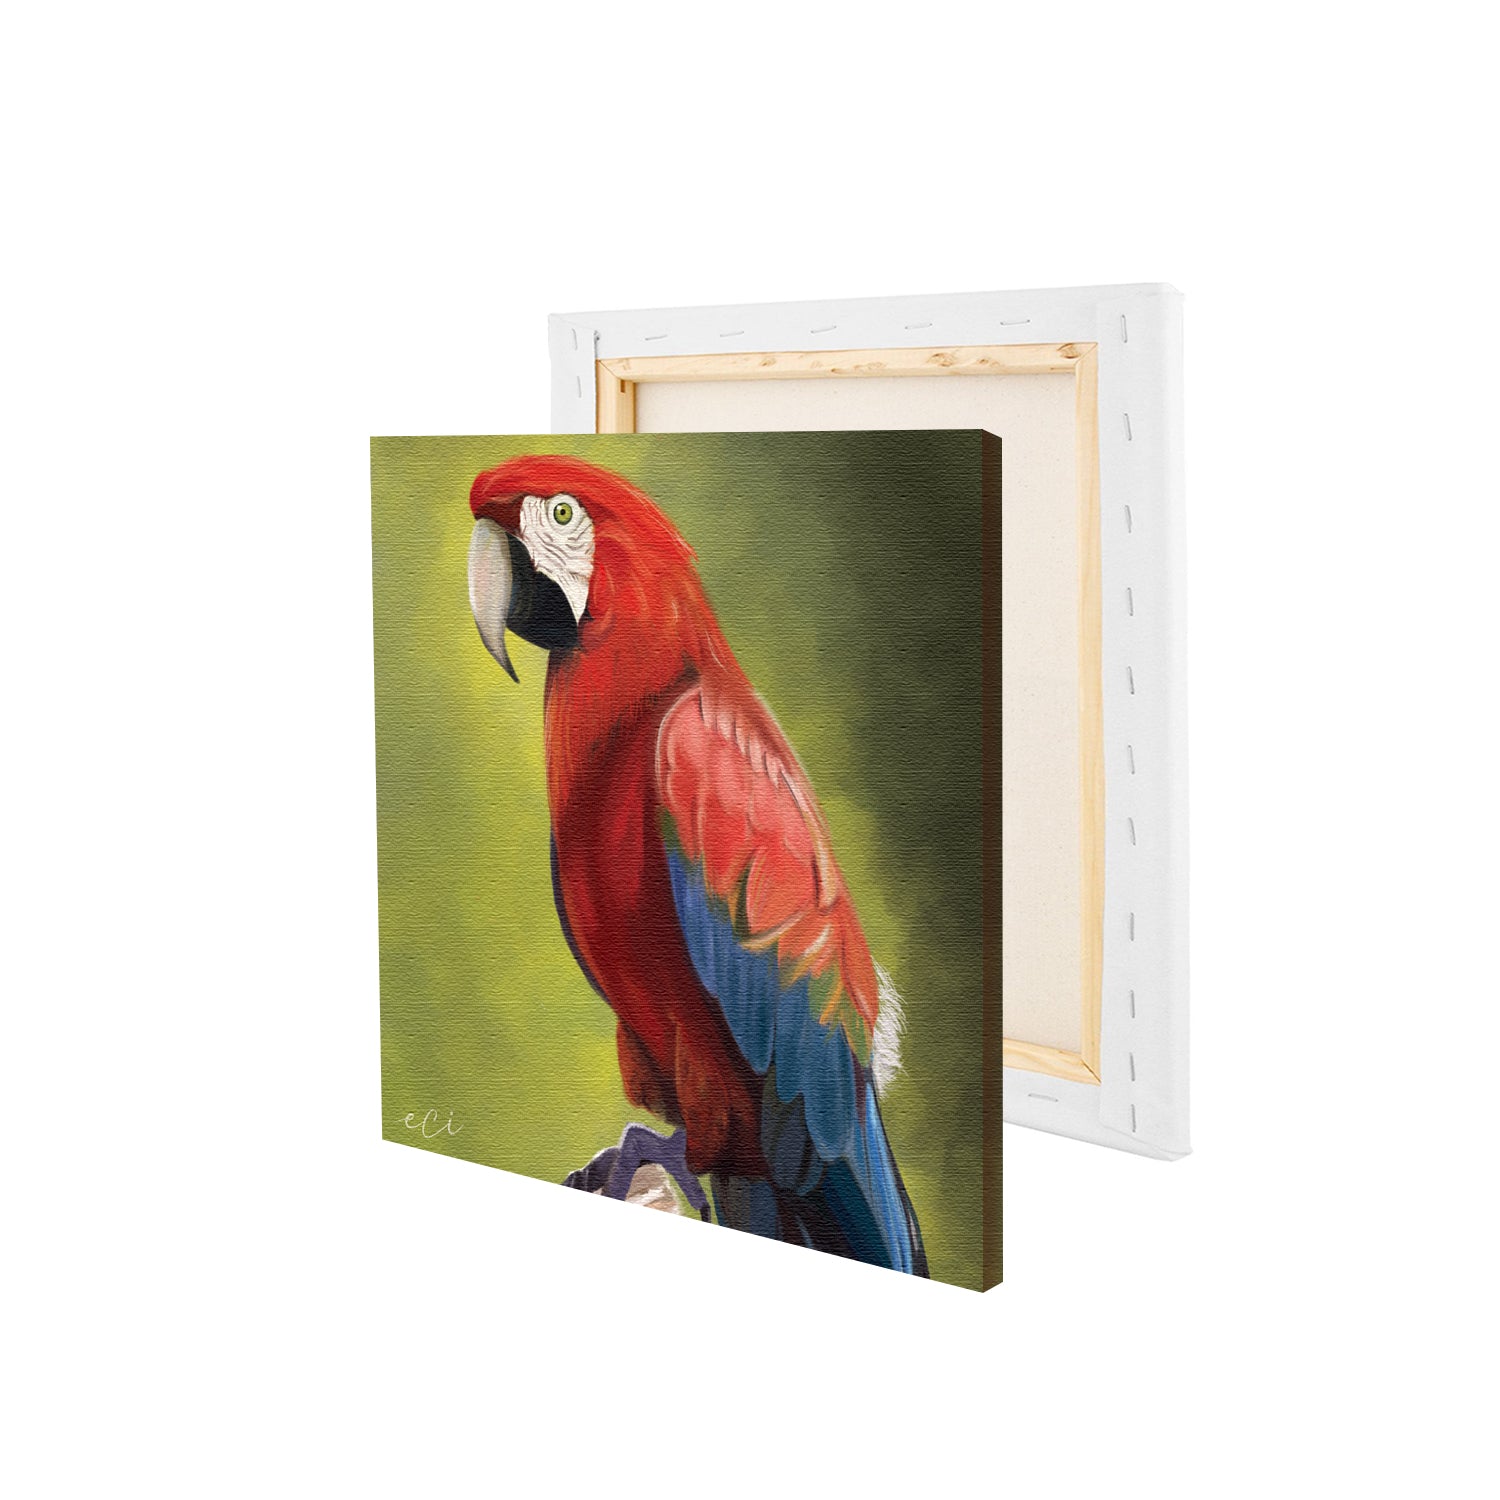 Colorful Parrot on Tree Original Design Canvas Printed Wall Painting 4